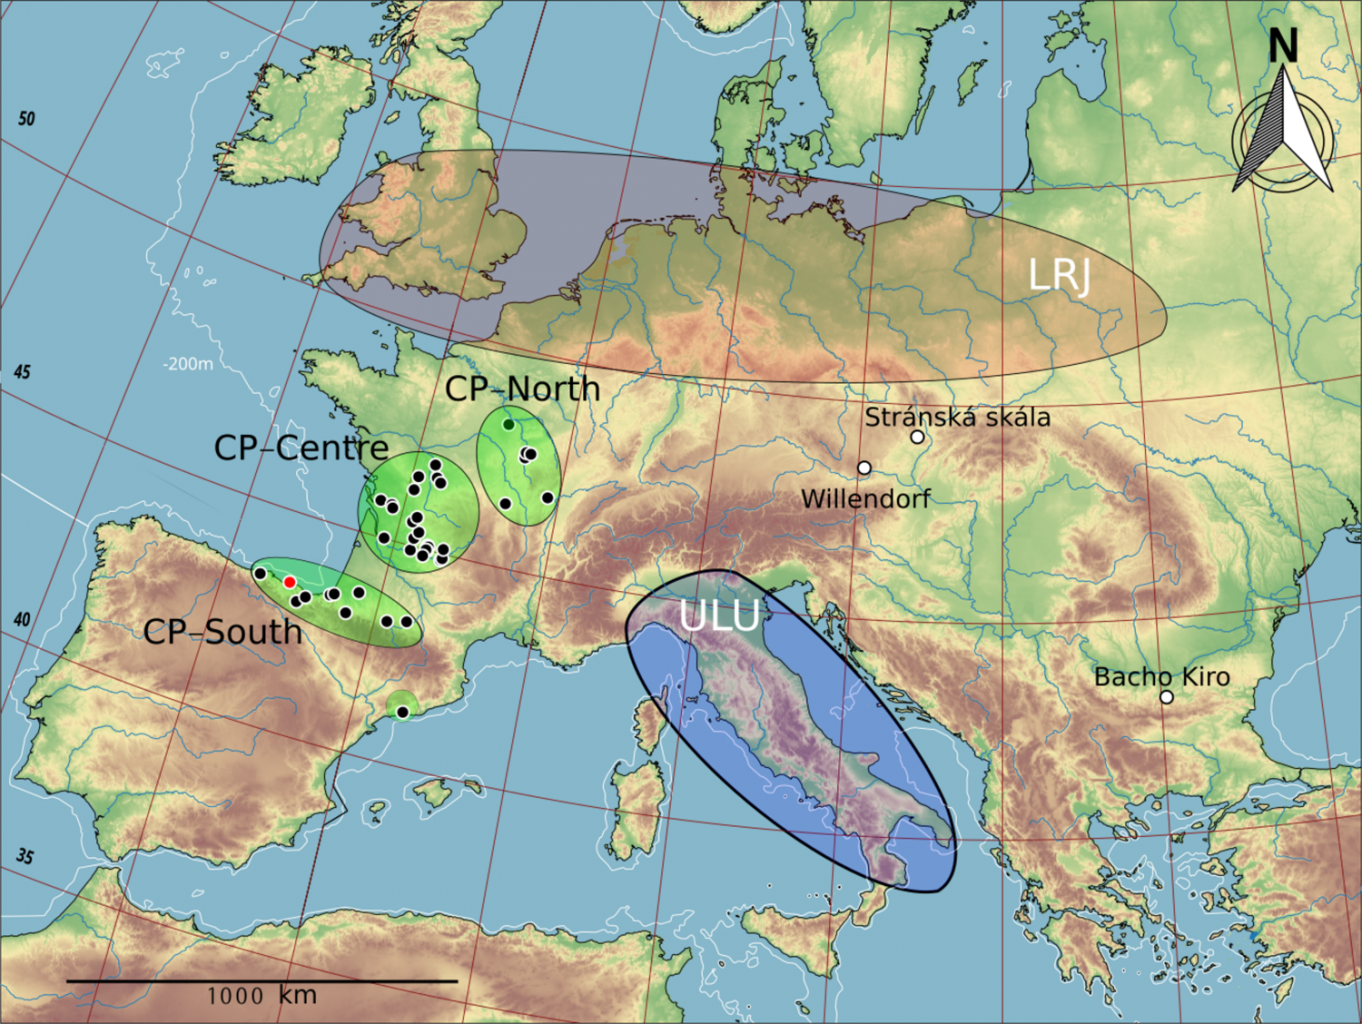 The spread of different techniques for making stone tools. On the territory of modern France and Spain, sites are marked where tools of the Chаtelperronian culture were found. Credit: Joseba Rios-Garaizar et al. / PLoS One, 2022